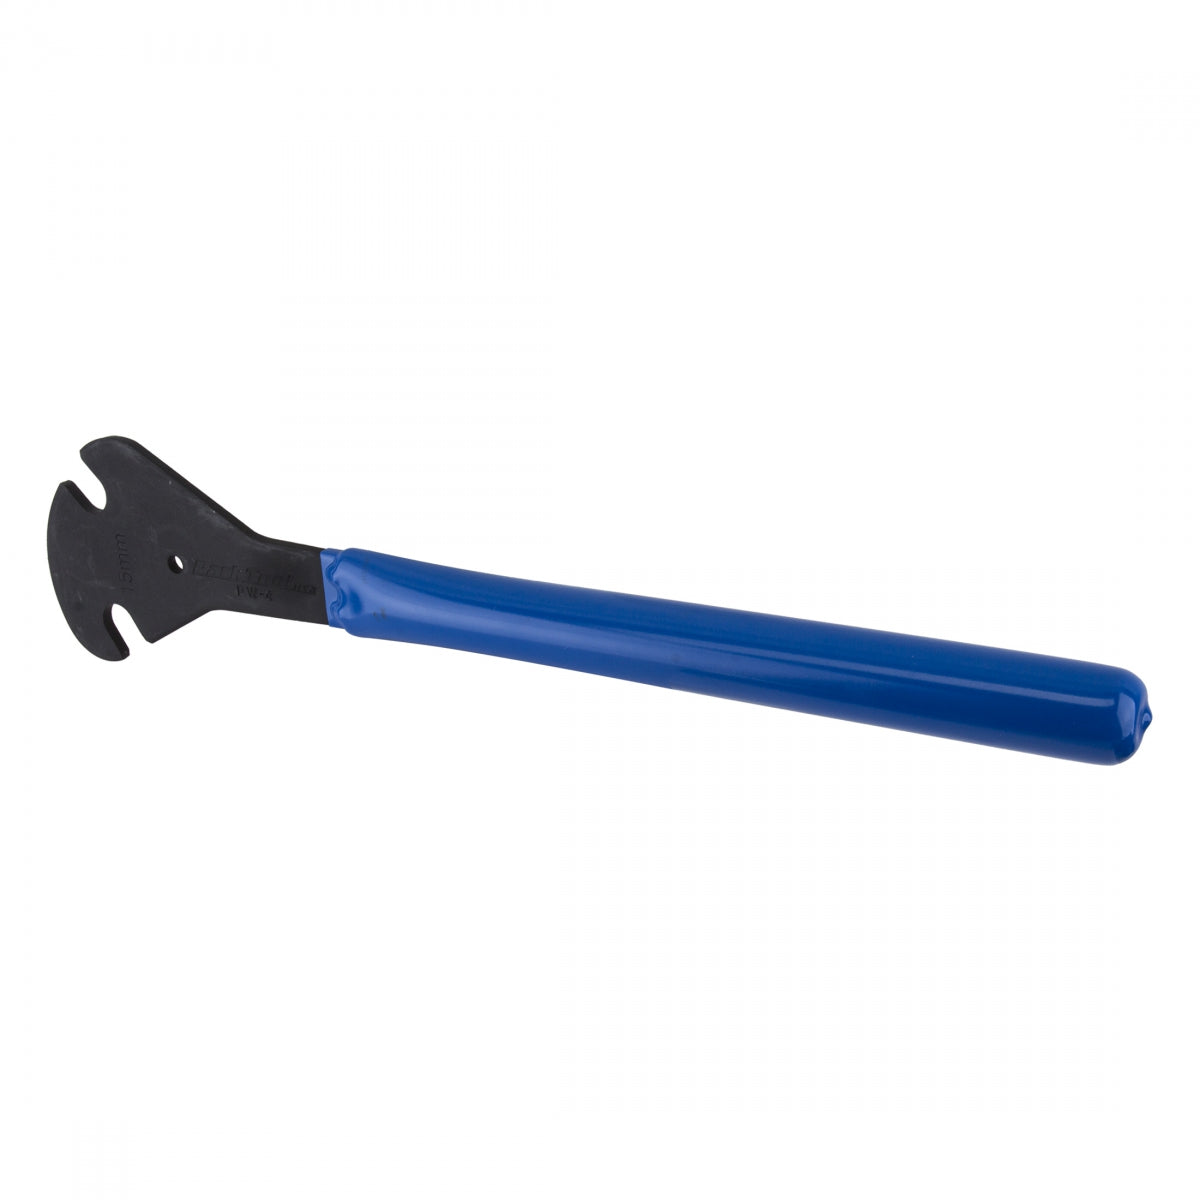 Park Tool #PW-4 Professional Shop Pedal Wrench 15mm